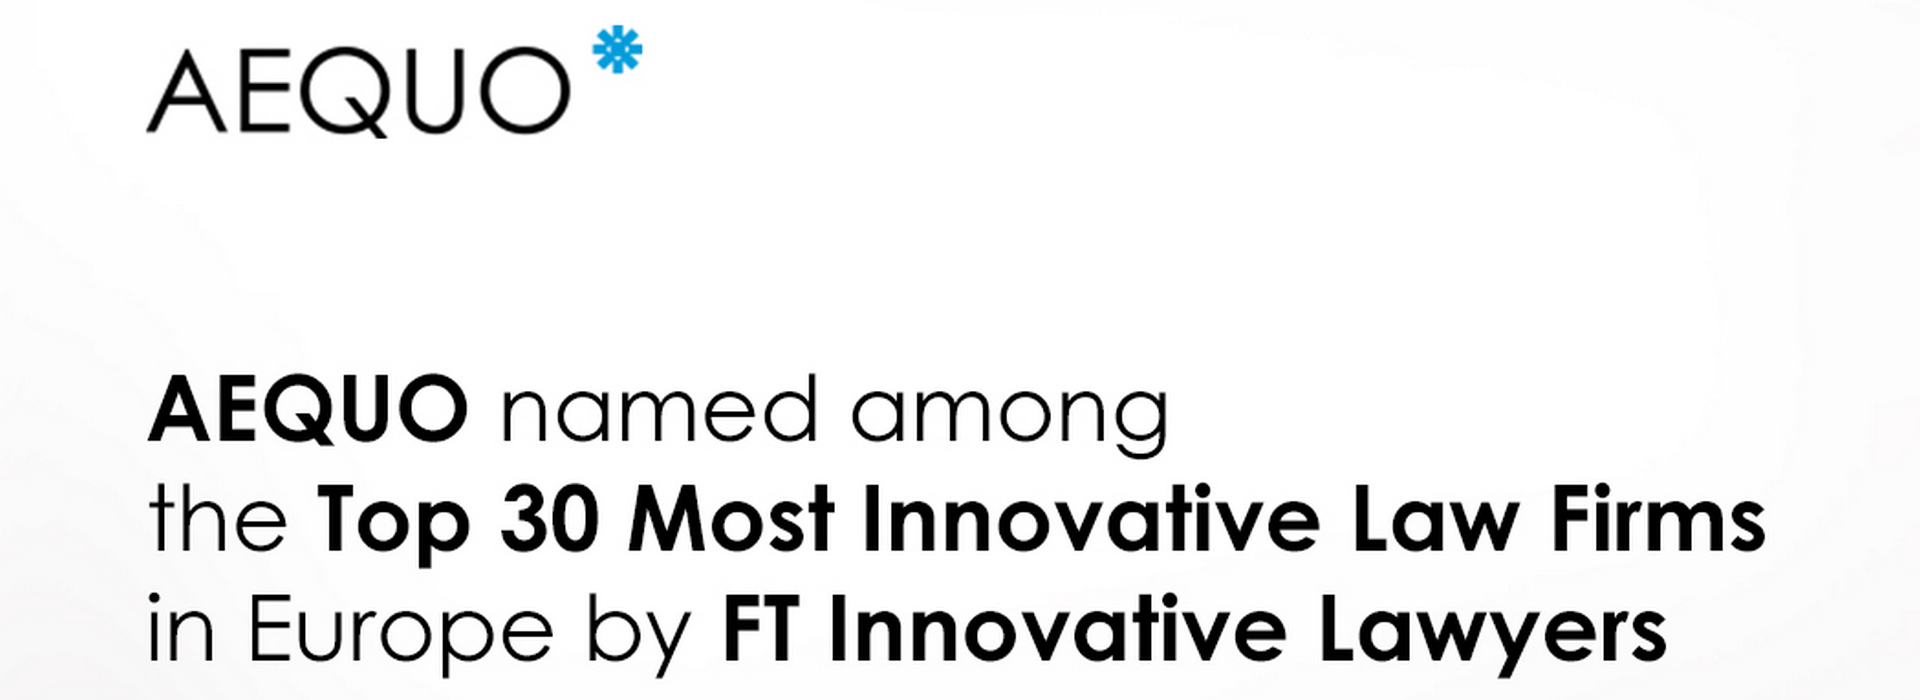 Aequo Is Among the Top 30 Most Innovative Law Firms in Europe, According to Financial Times Innovative Lawyers 2020